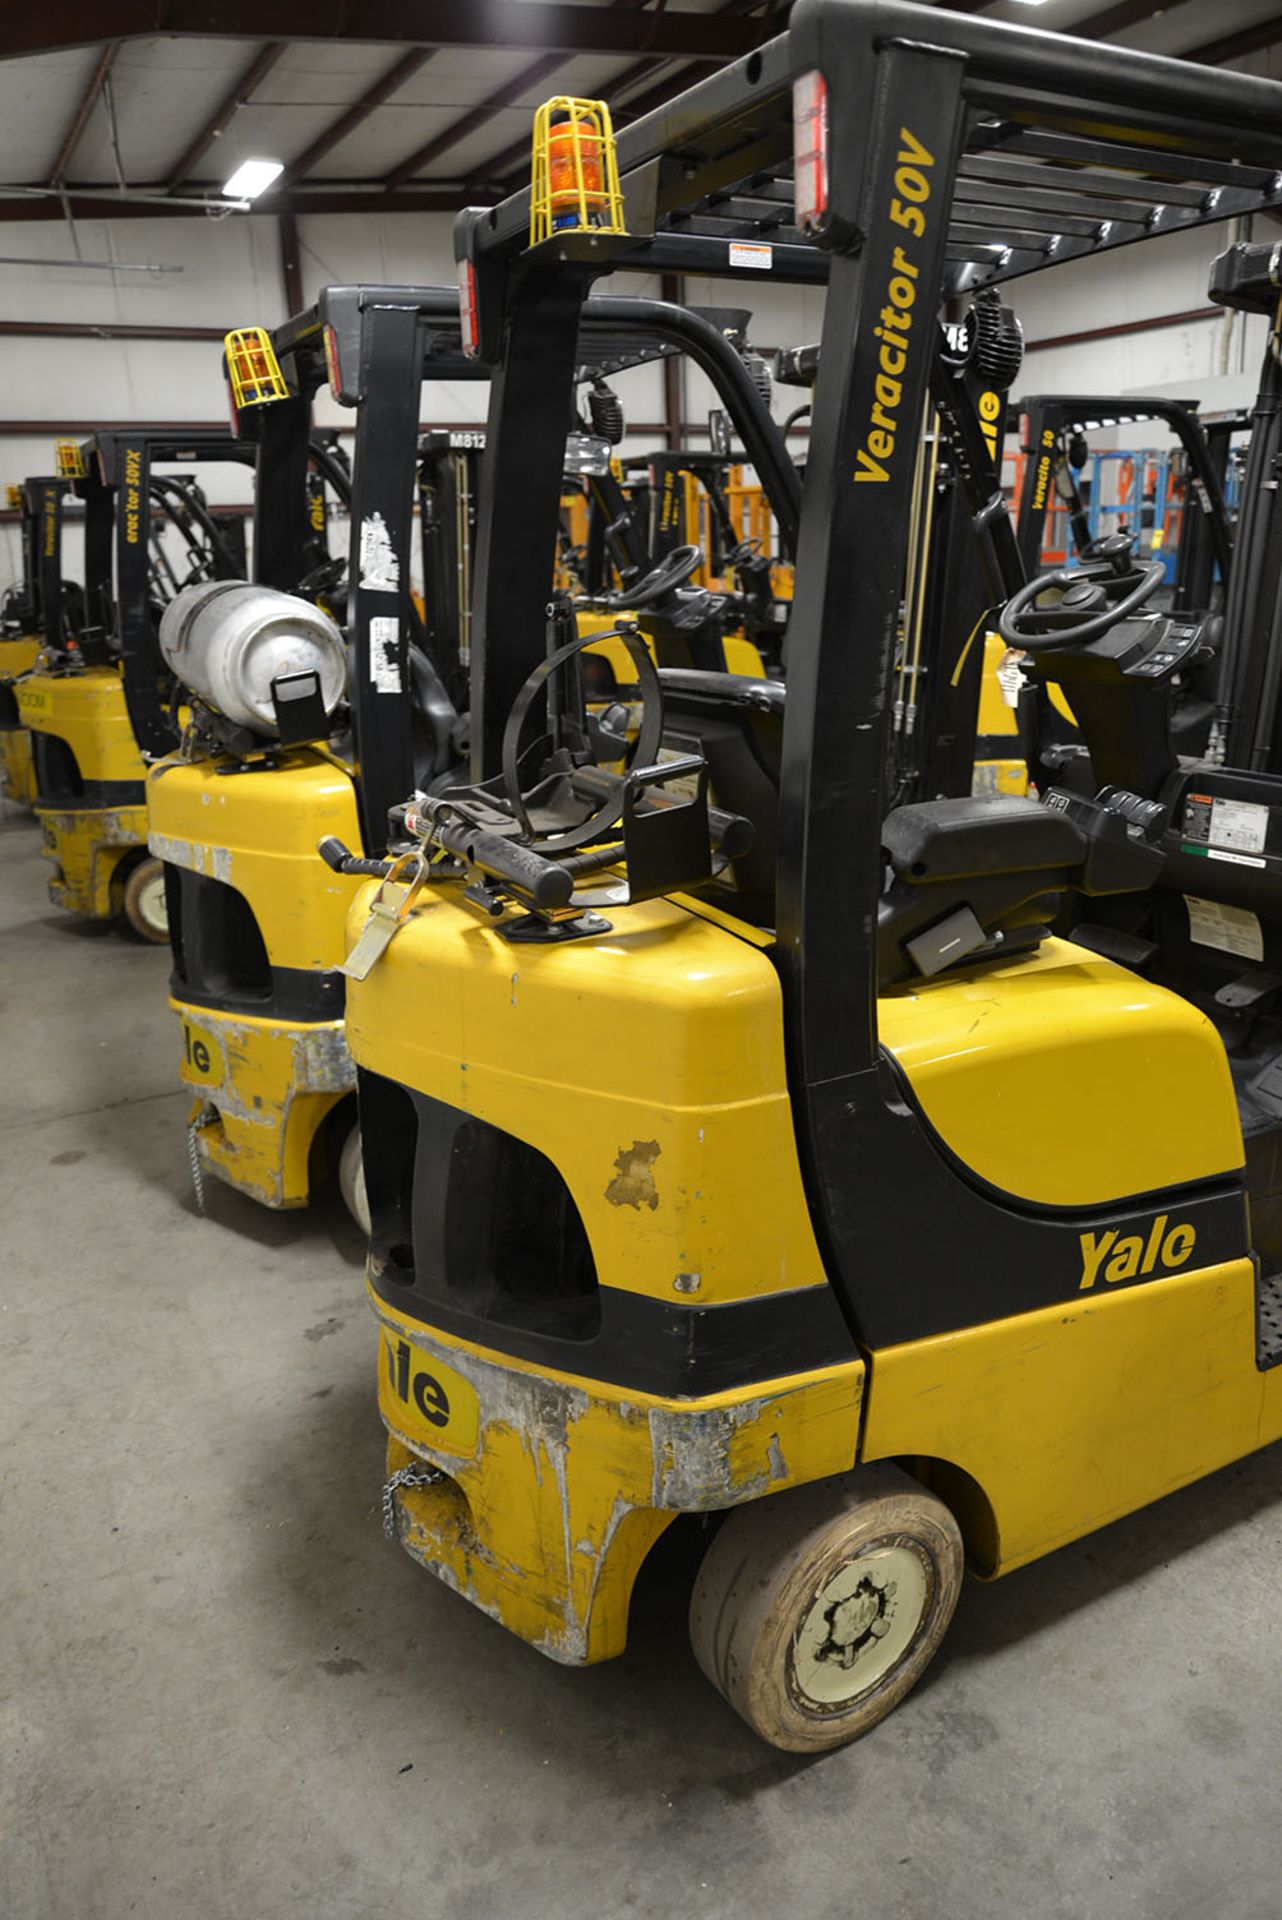 2008 YALE 5,000-lb. Capacity Forklift, Model GLC050VXNV, S/N A910V13956F, LPG, Solid Non-Marking - Image 4 of 6